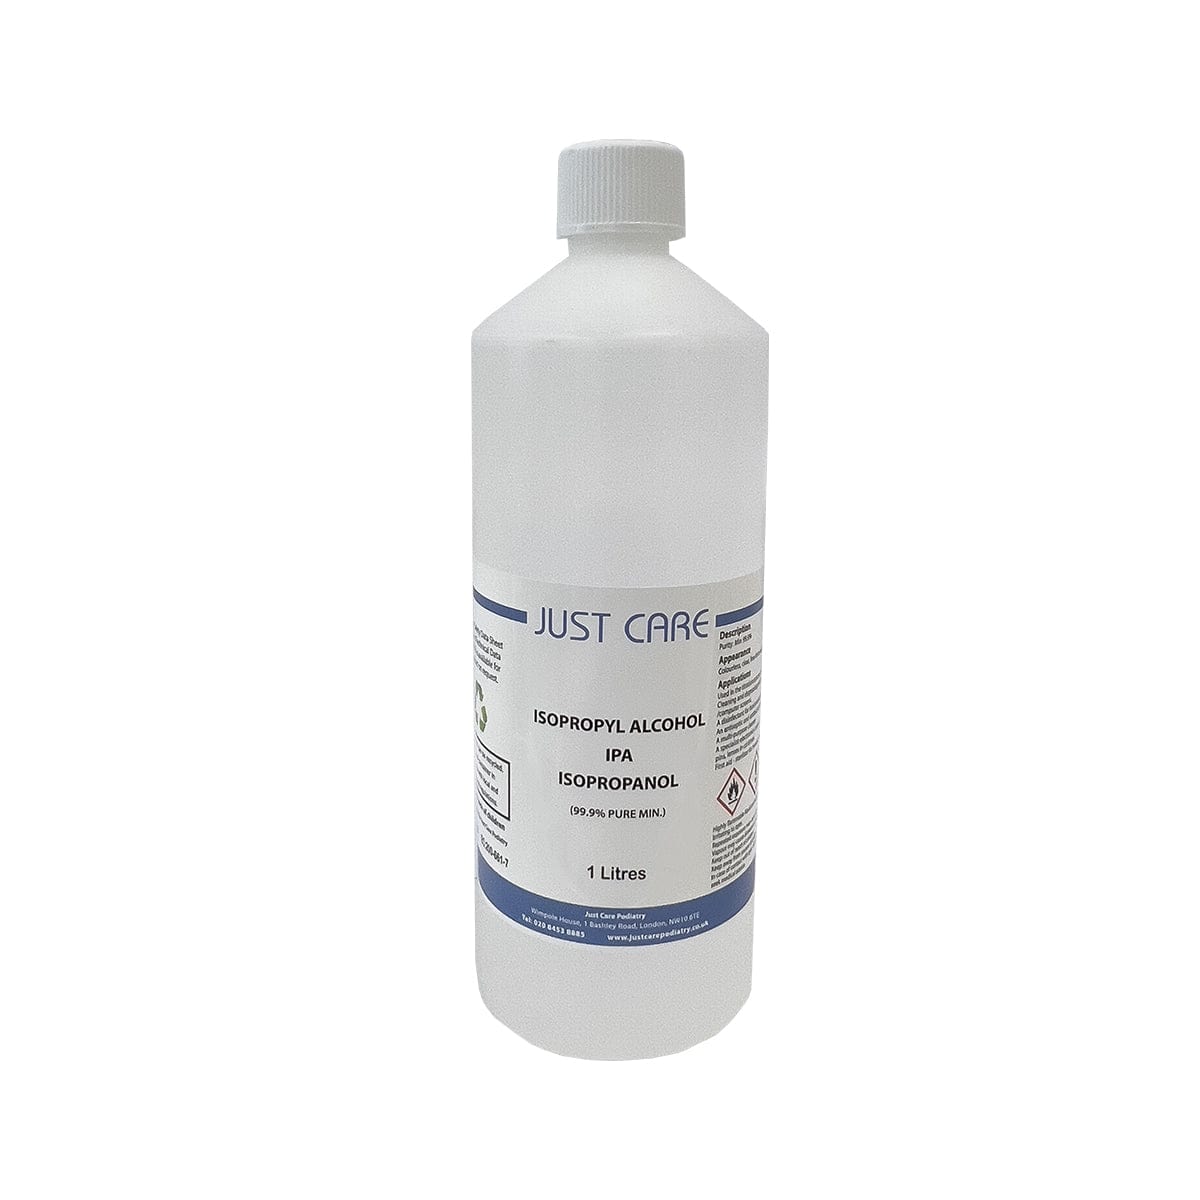 Just Care 99.9% Isopropyl Alcohol 1 Litre